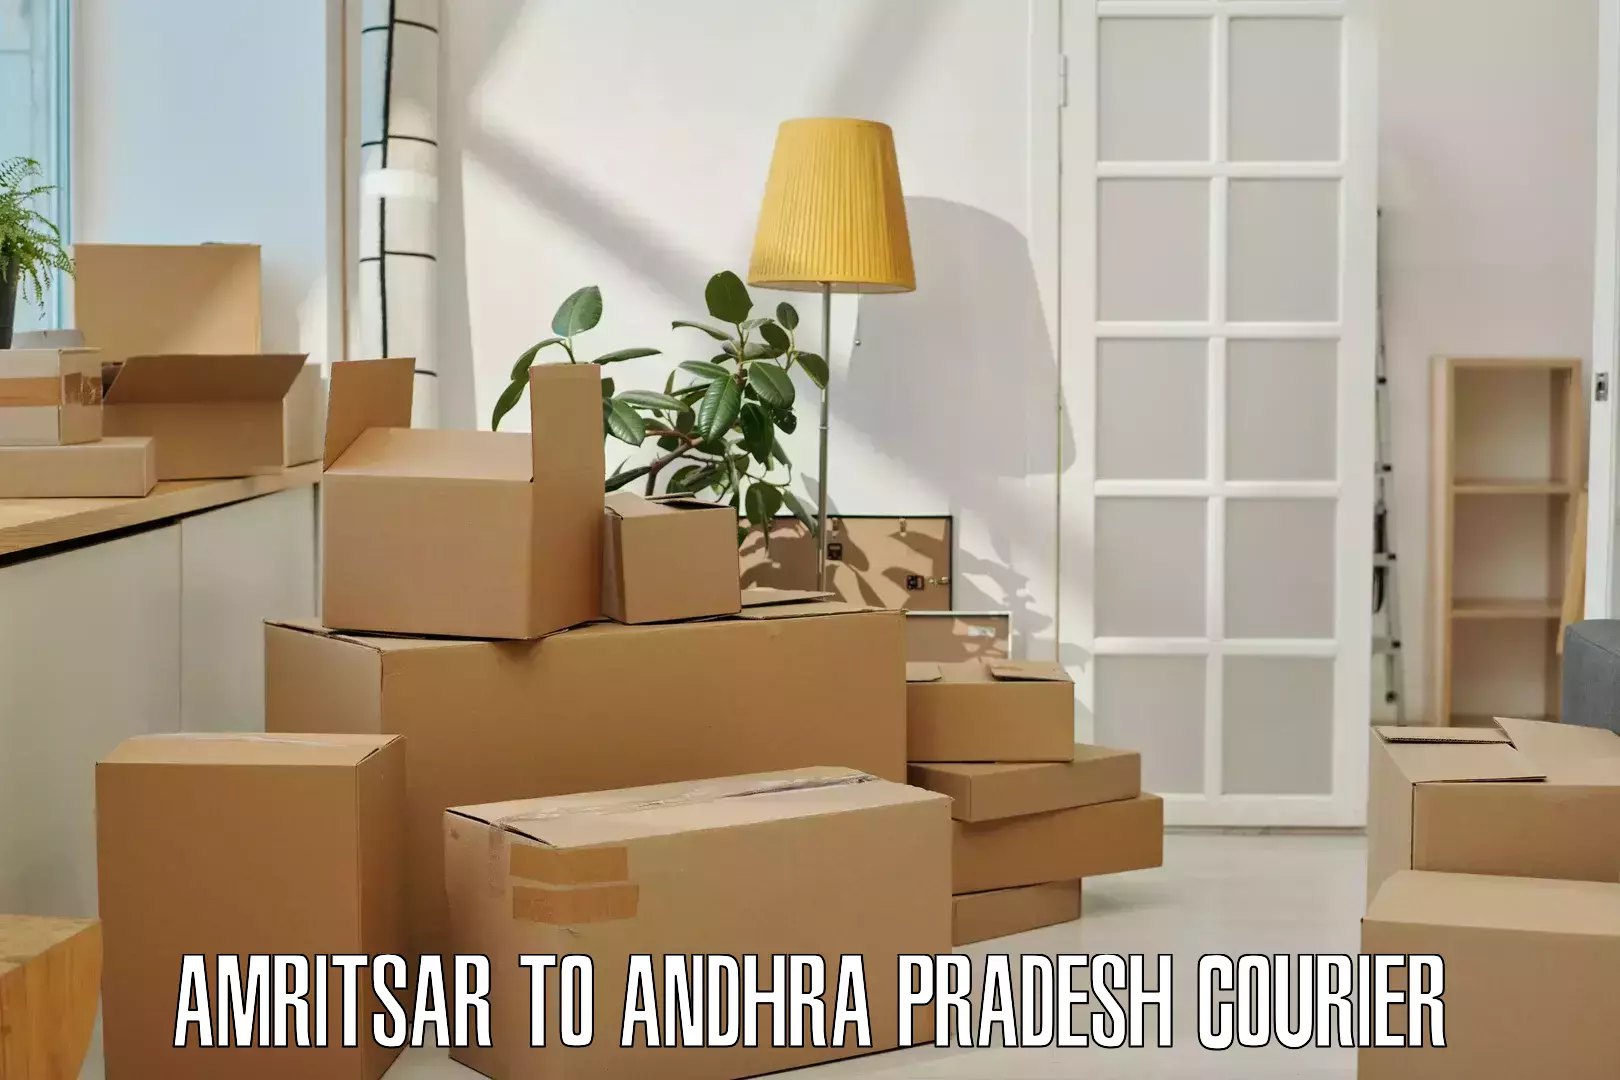 Cash on delivery service Amritsar to Andhra Pradesh